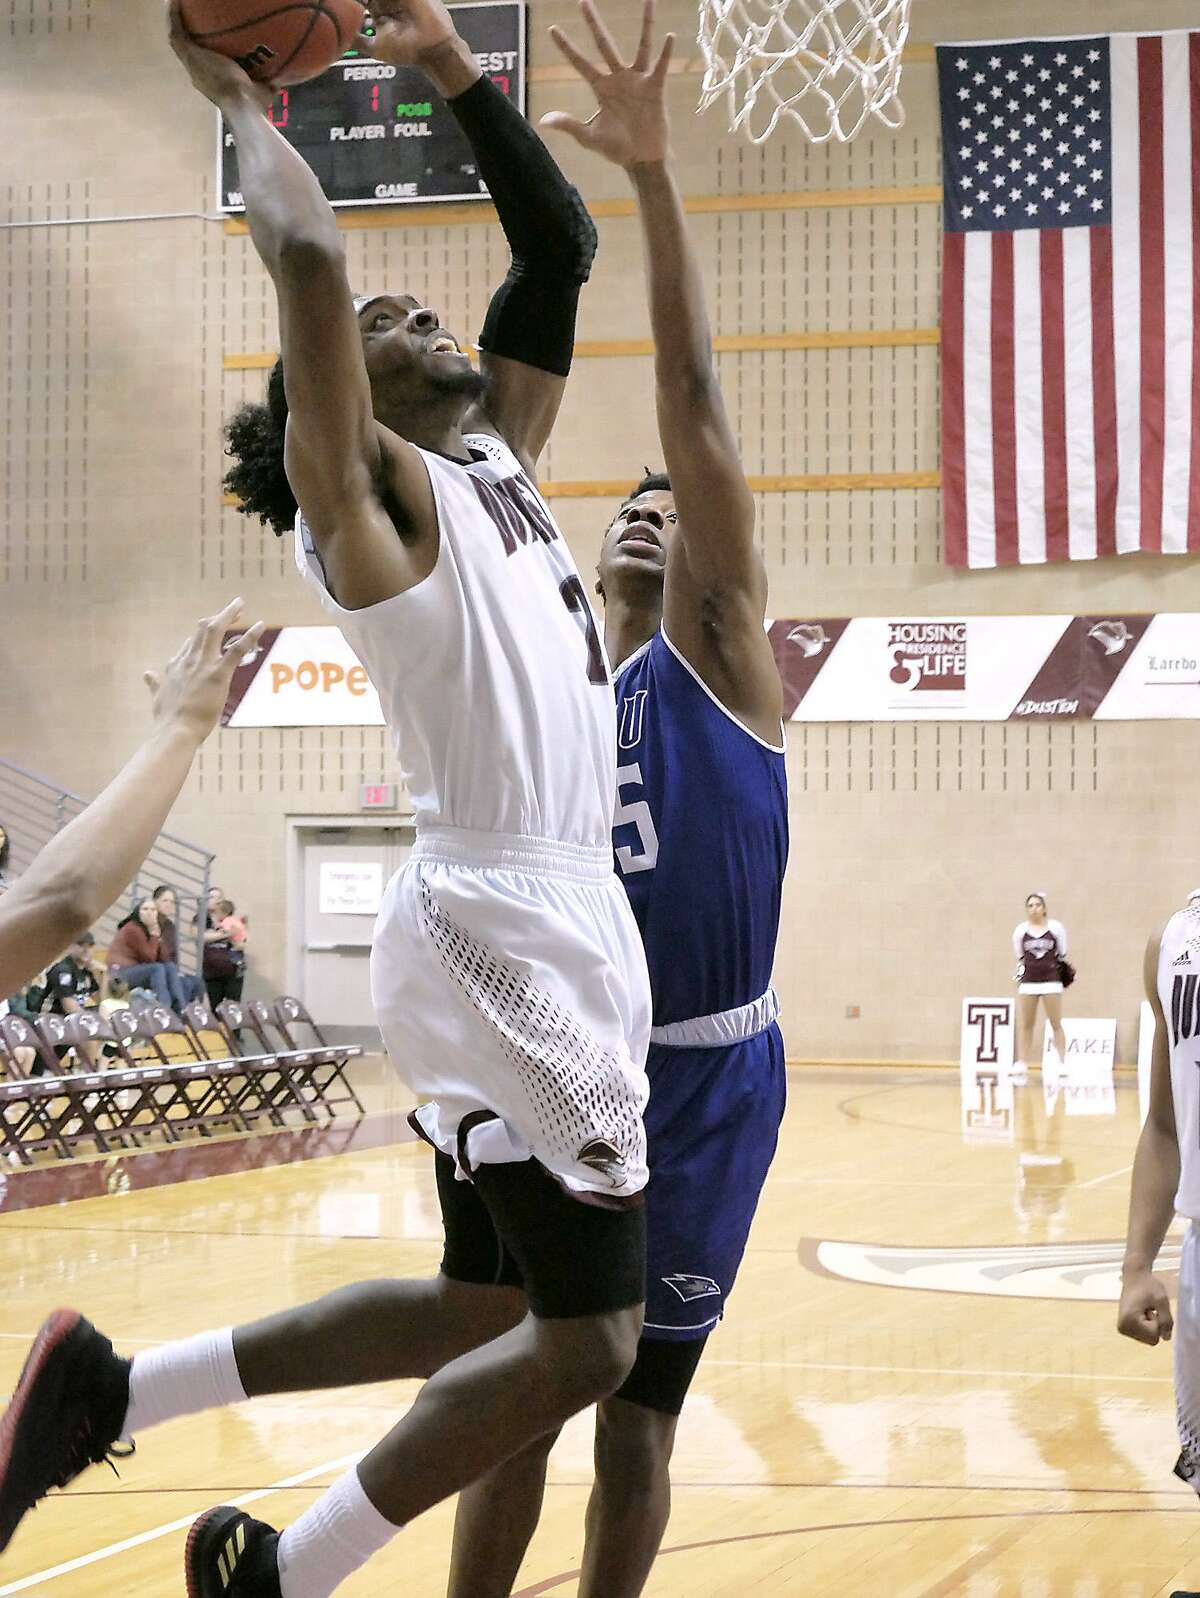 Kamari Robinson finished with 15 points, four rebounds and three steals leading TAMIU to a 49-48 victory over fourth-place Lubbock Christian Saturday for its second straight conference win.